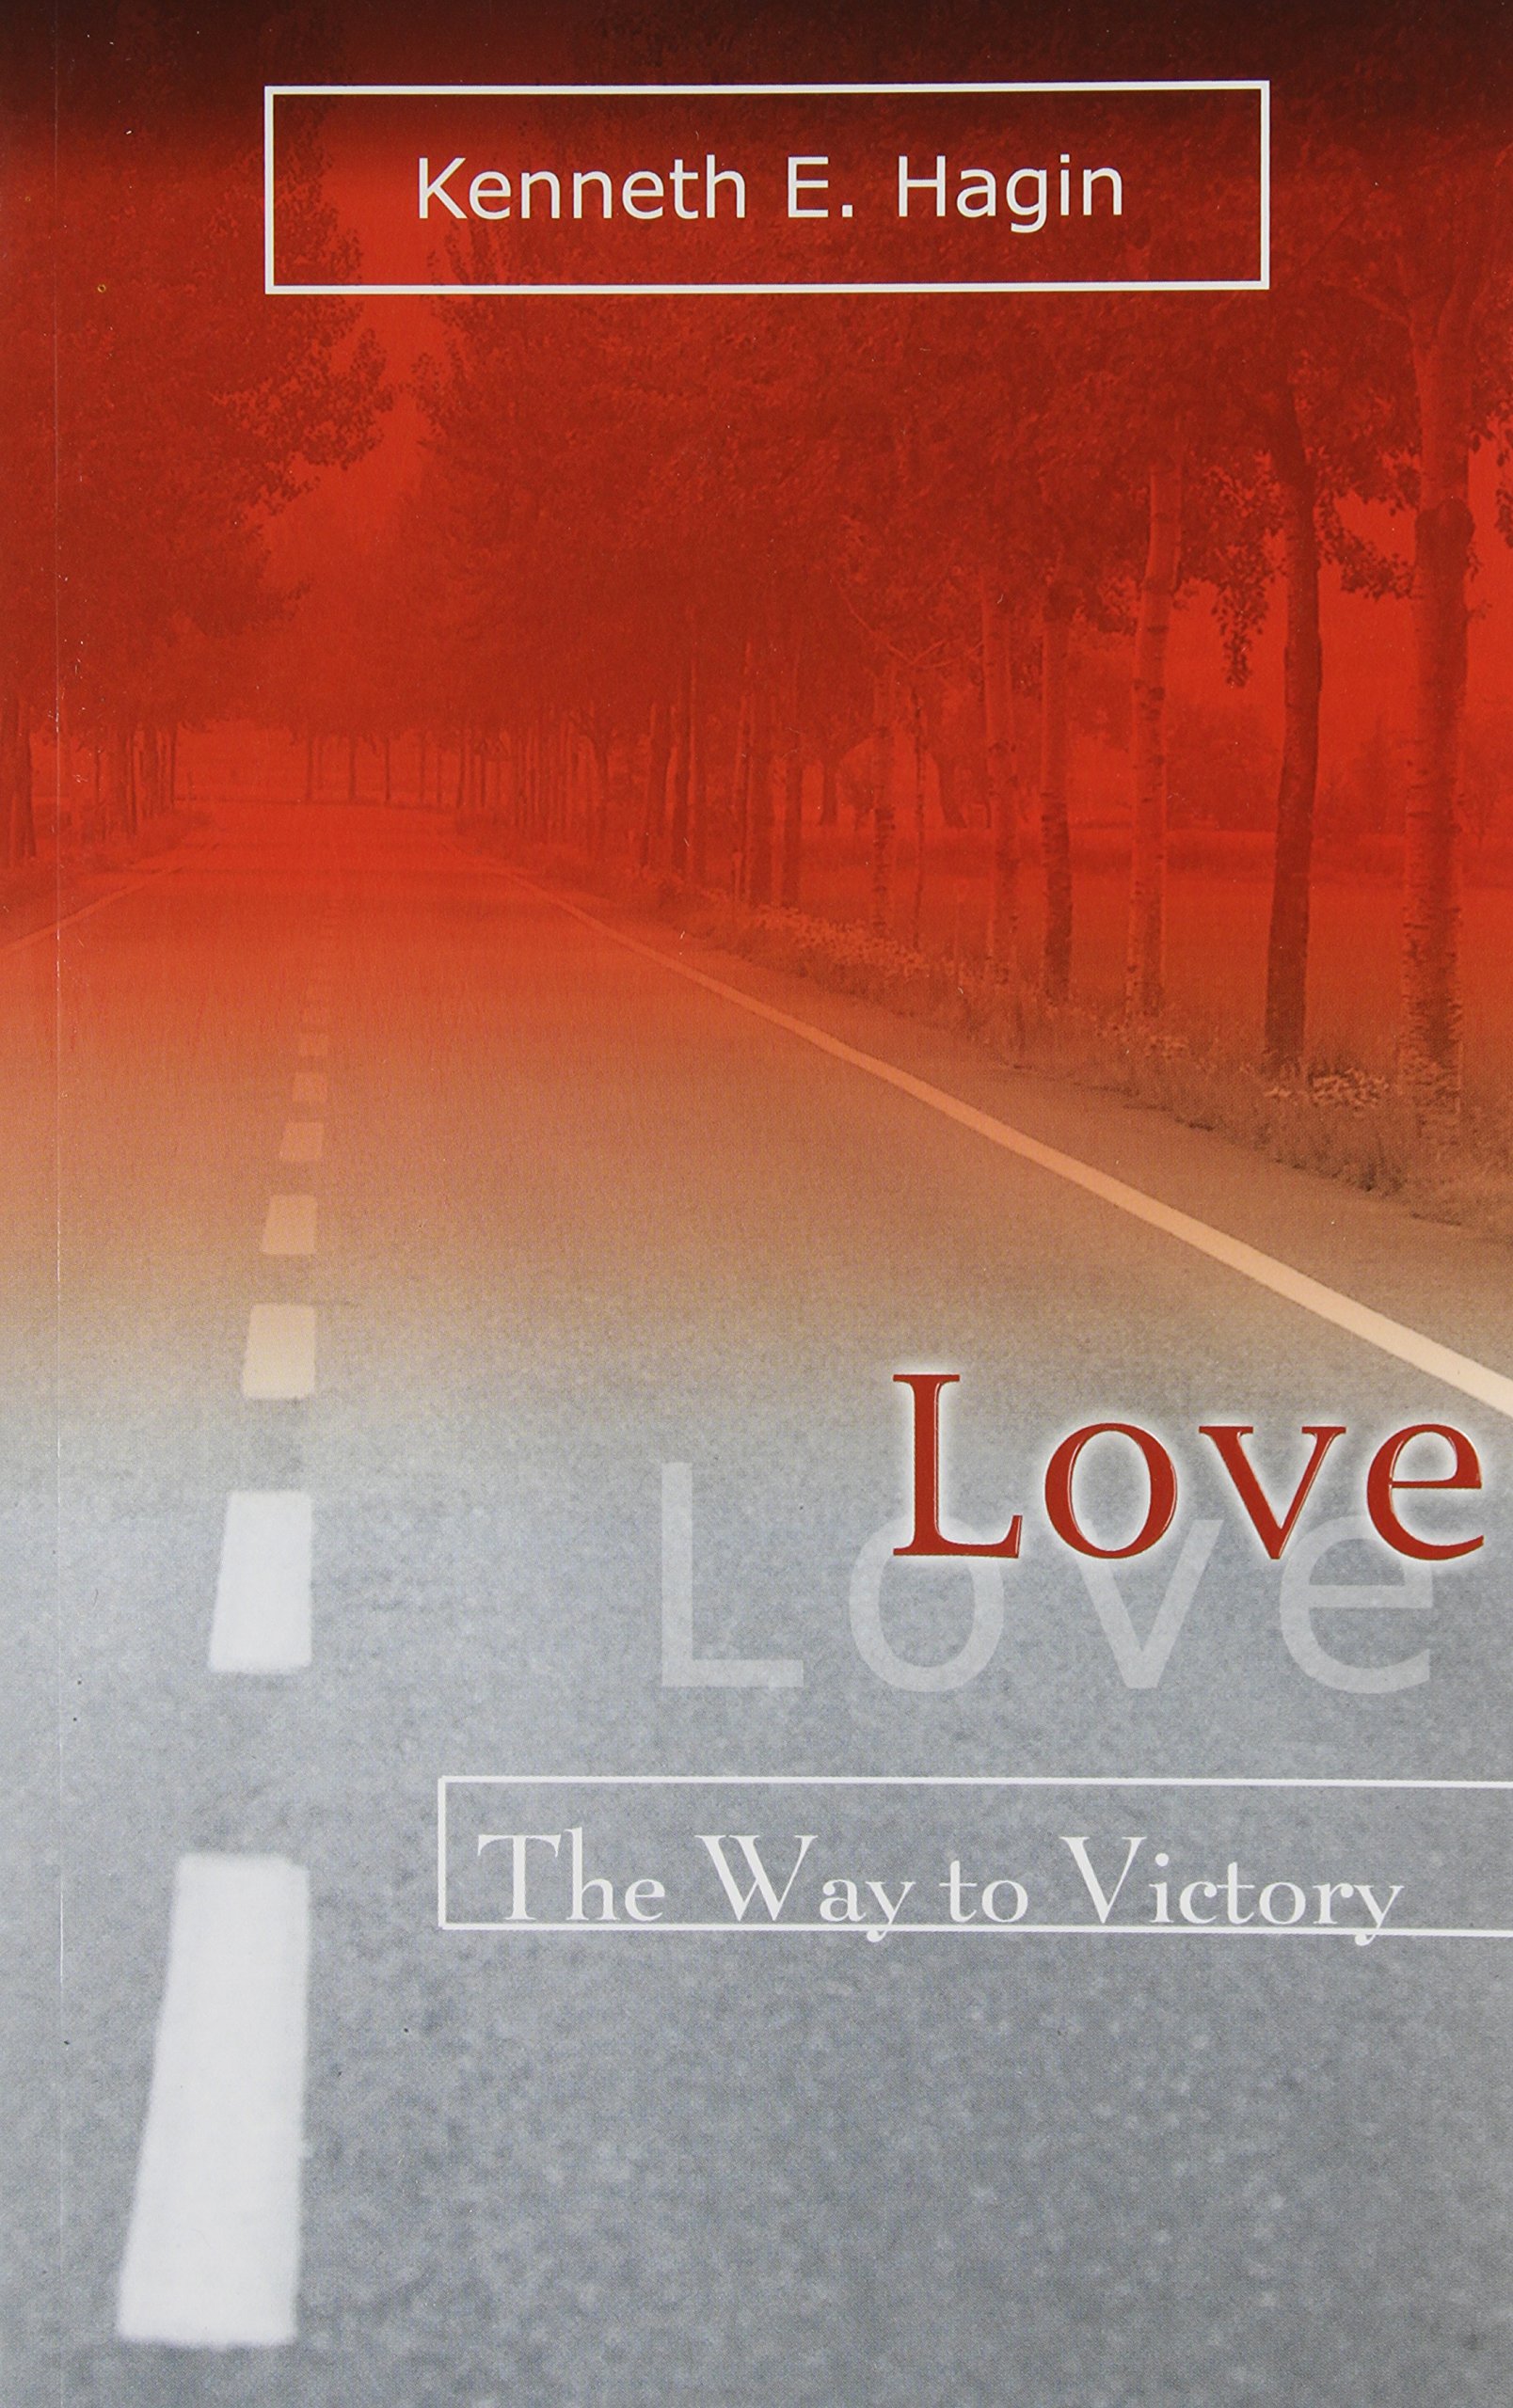 DOWNLOAD PDF: Love – The Way to Victory by Kenneth Hagin 18